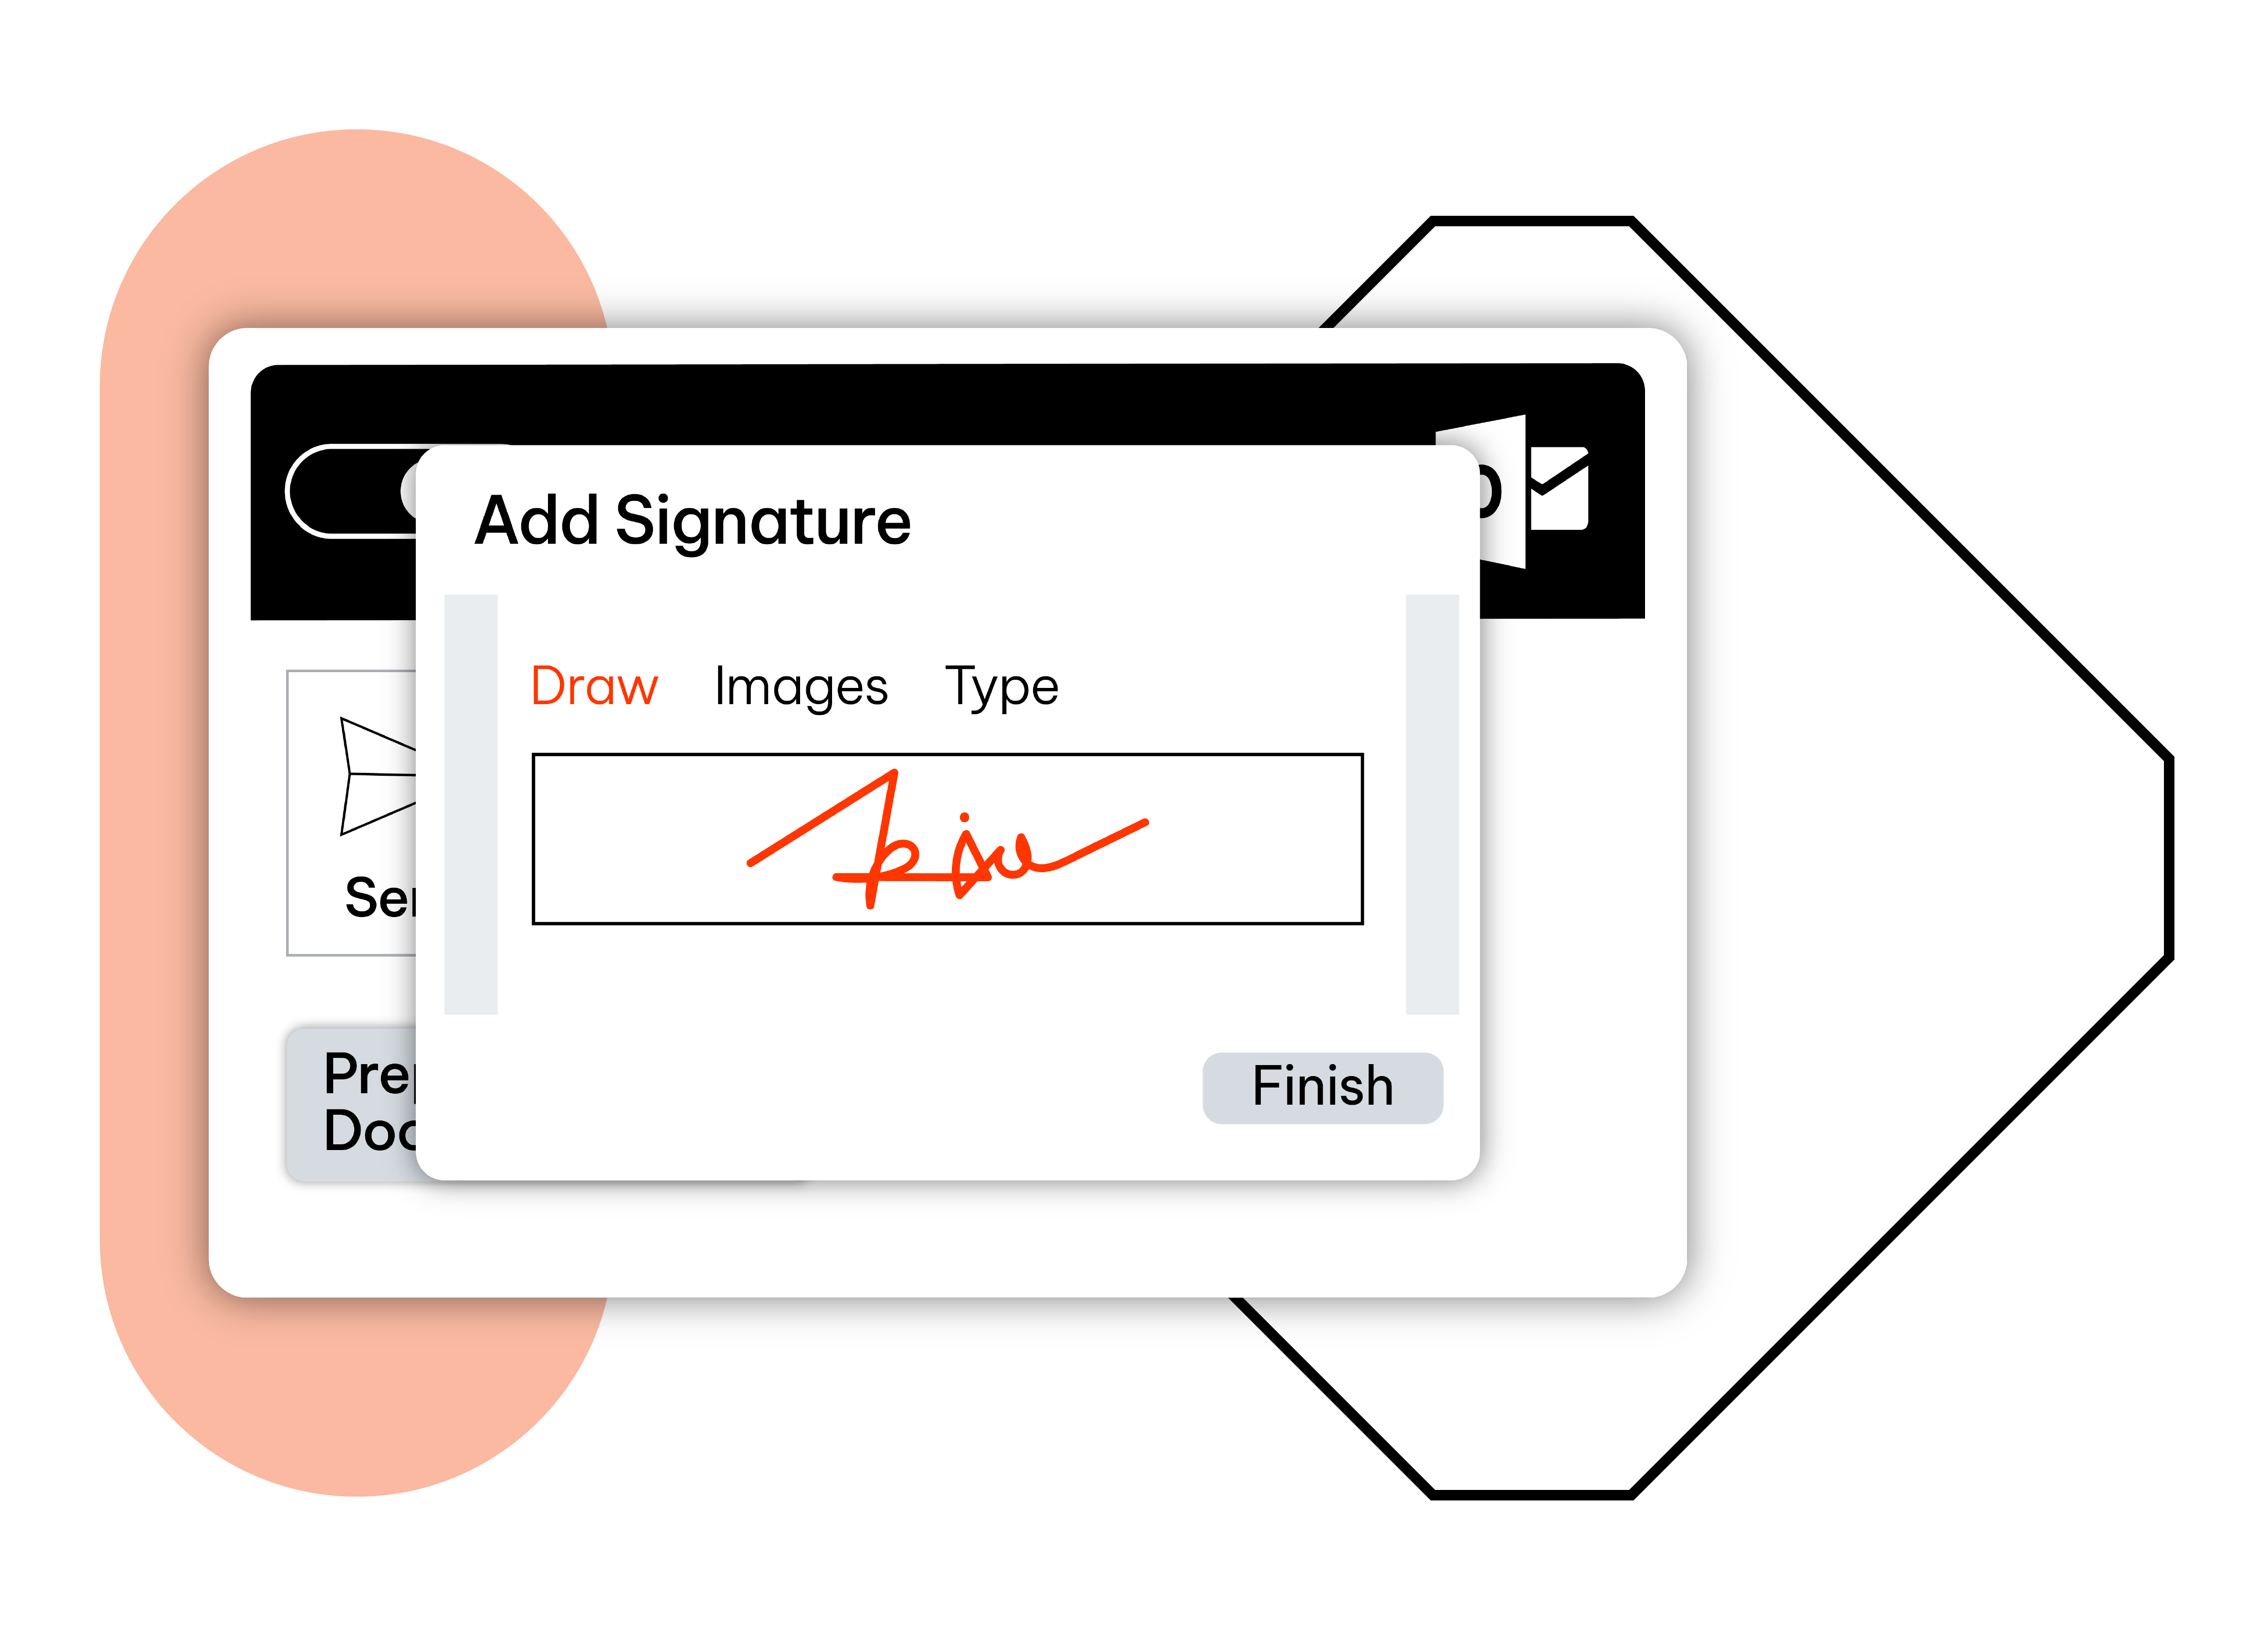 9414 - ZIV - Secure eSignature Product Page Imagery - With Shapes - 4751x3406px_EFFICIENT OPERATIONS